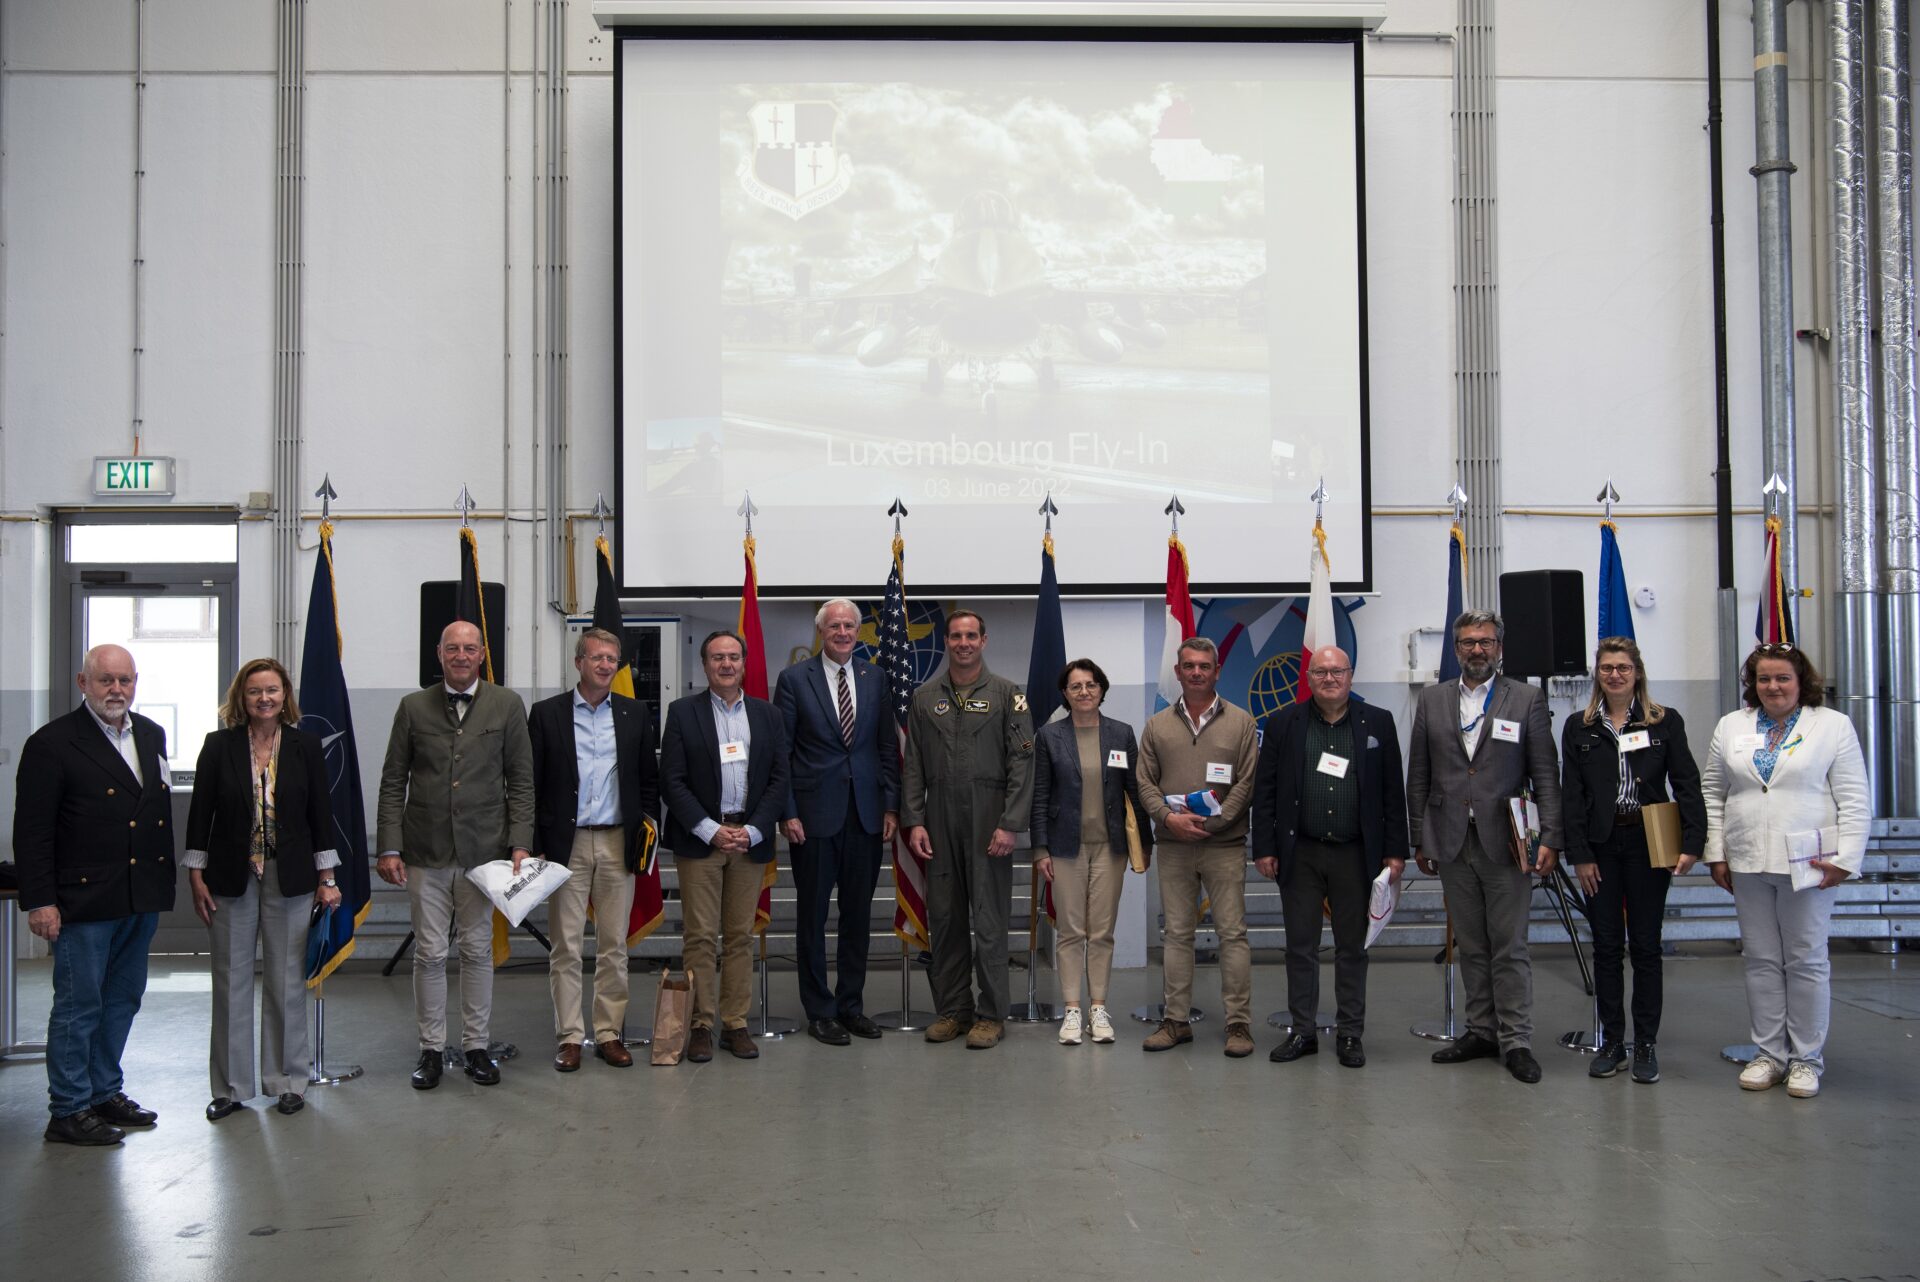 Col. Leslie Hauck, center, 52nd Fighter Wing commander, poses with visitors, including multiple ambassadors from NATO countries at Spangdahlem Air Base, Germany, June 3, 2022. NATO promotes democratic values and diplomacy; and enables members to consult and cooperate on defense and security-related issues, to build trust and, ultimately, to prevent conflict.